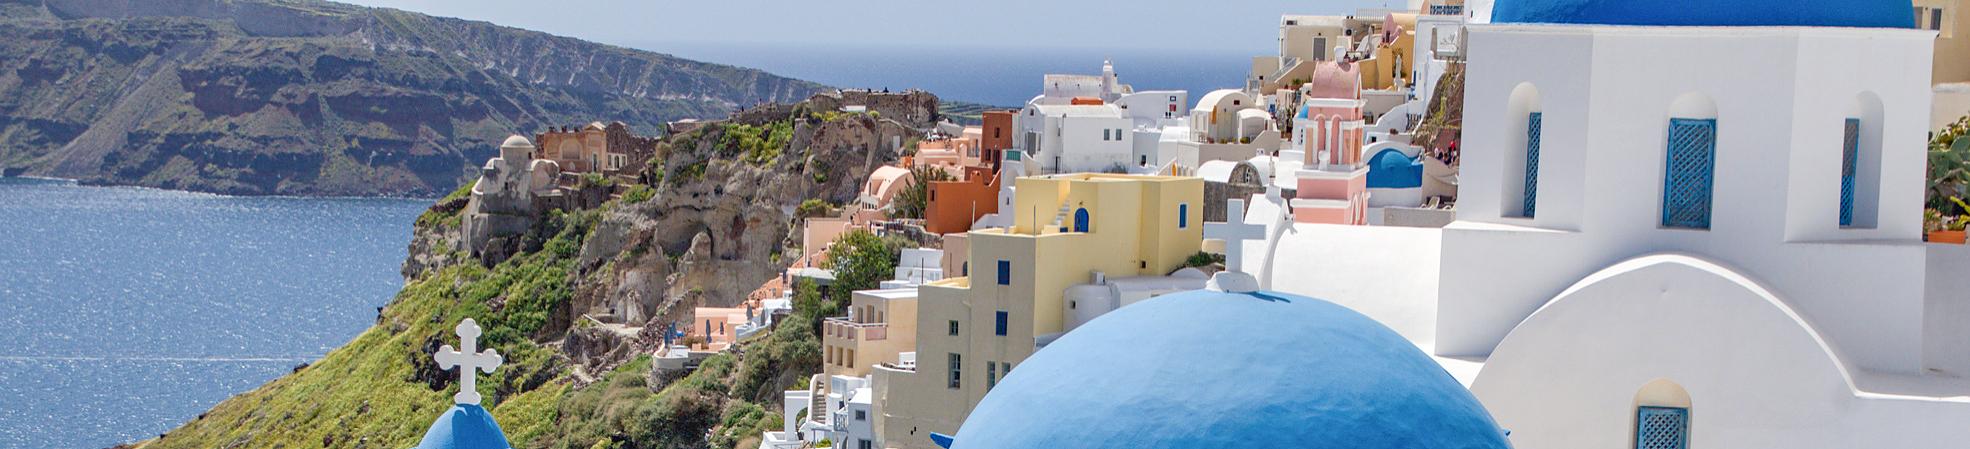 Highlights of Greece: What Not to Miss for Your First Visit